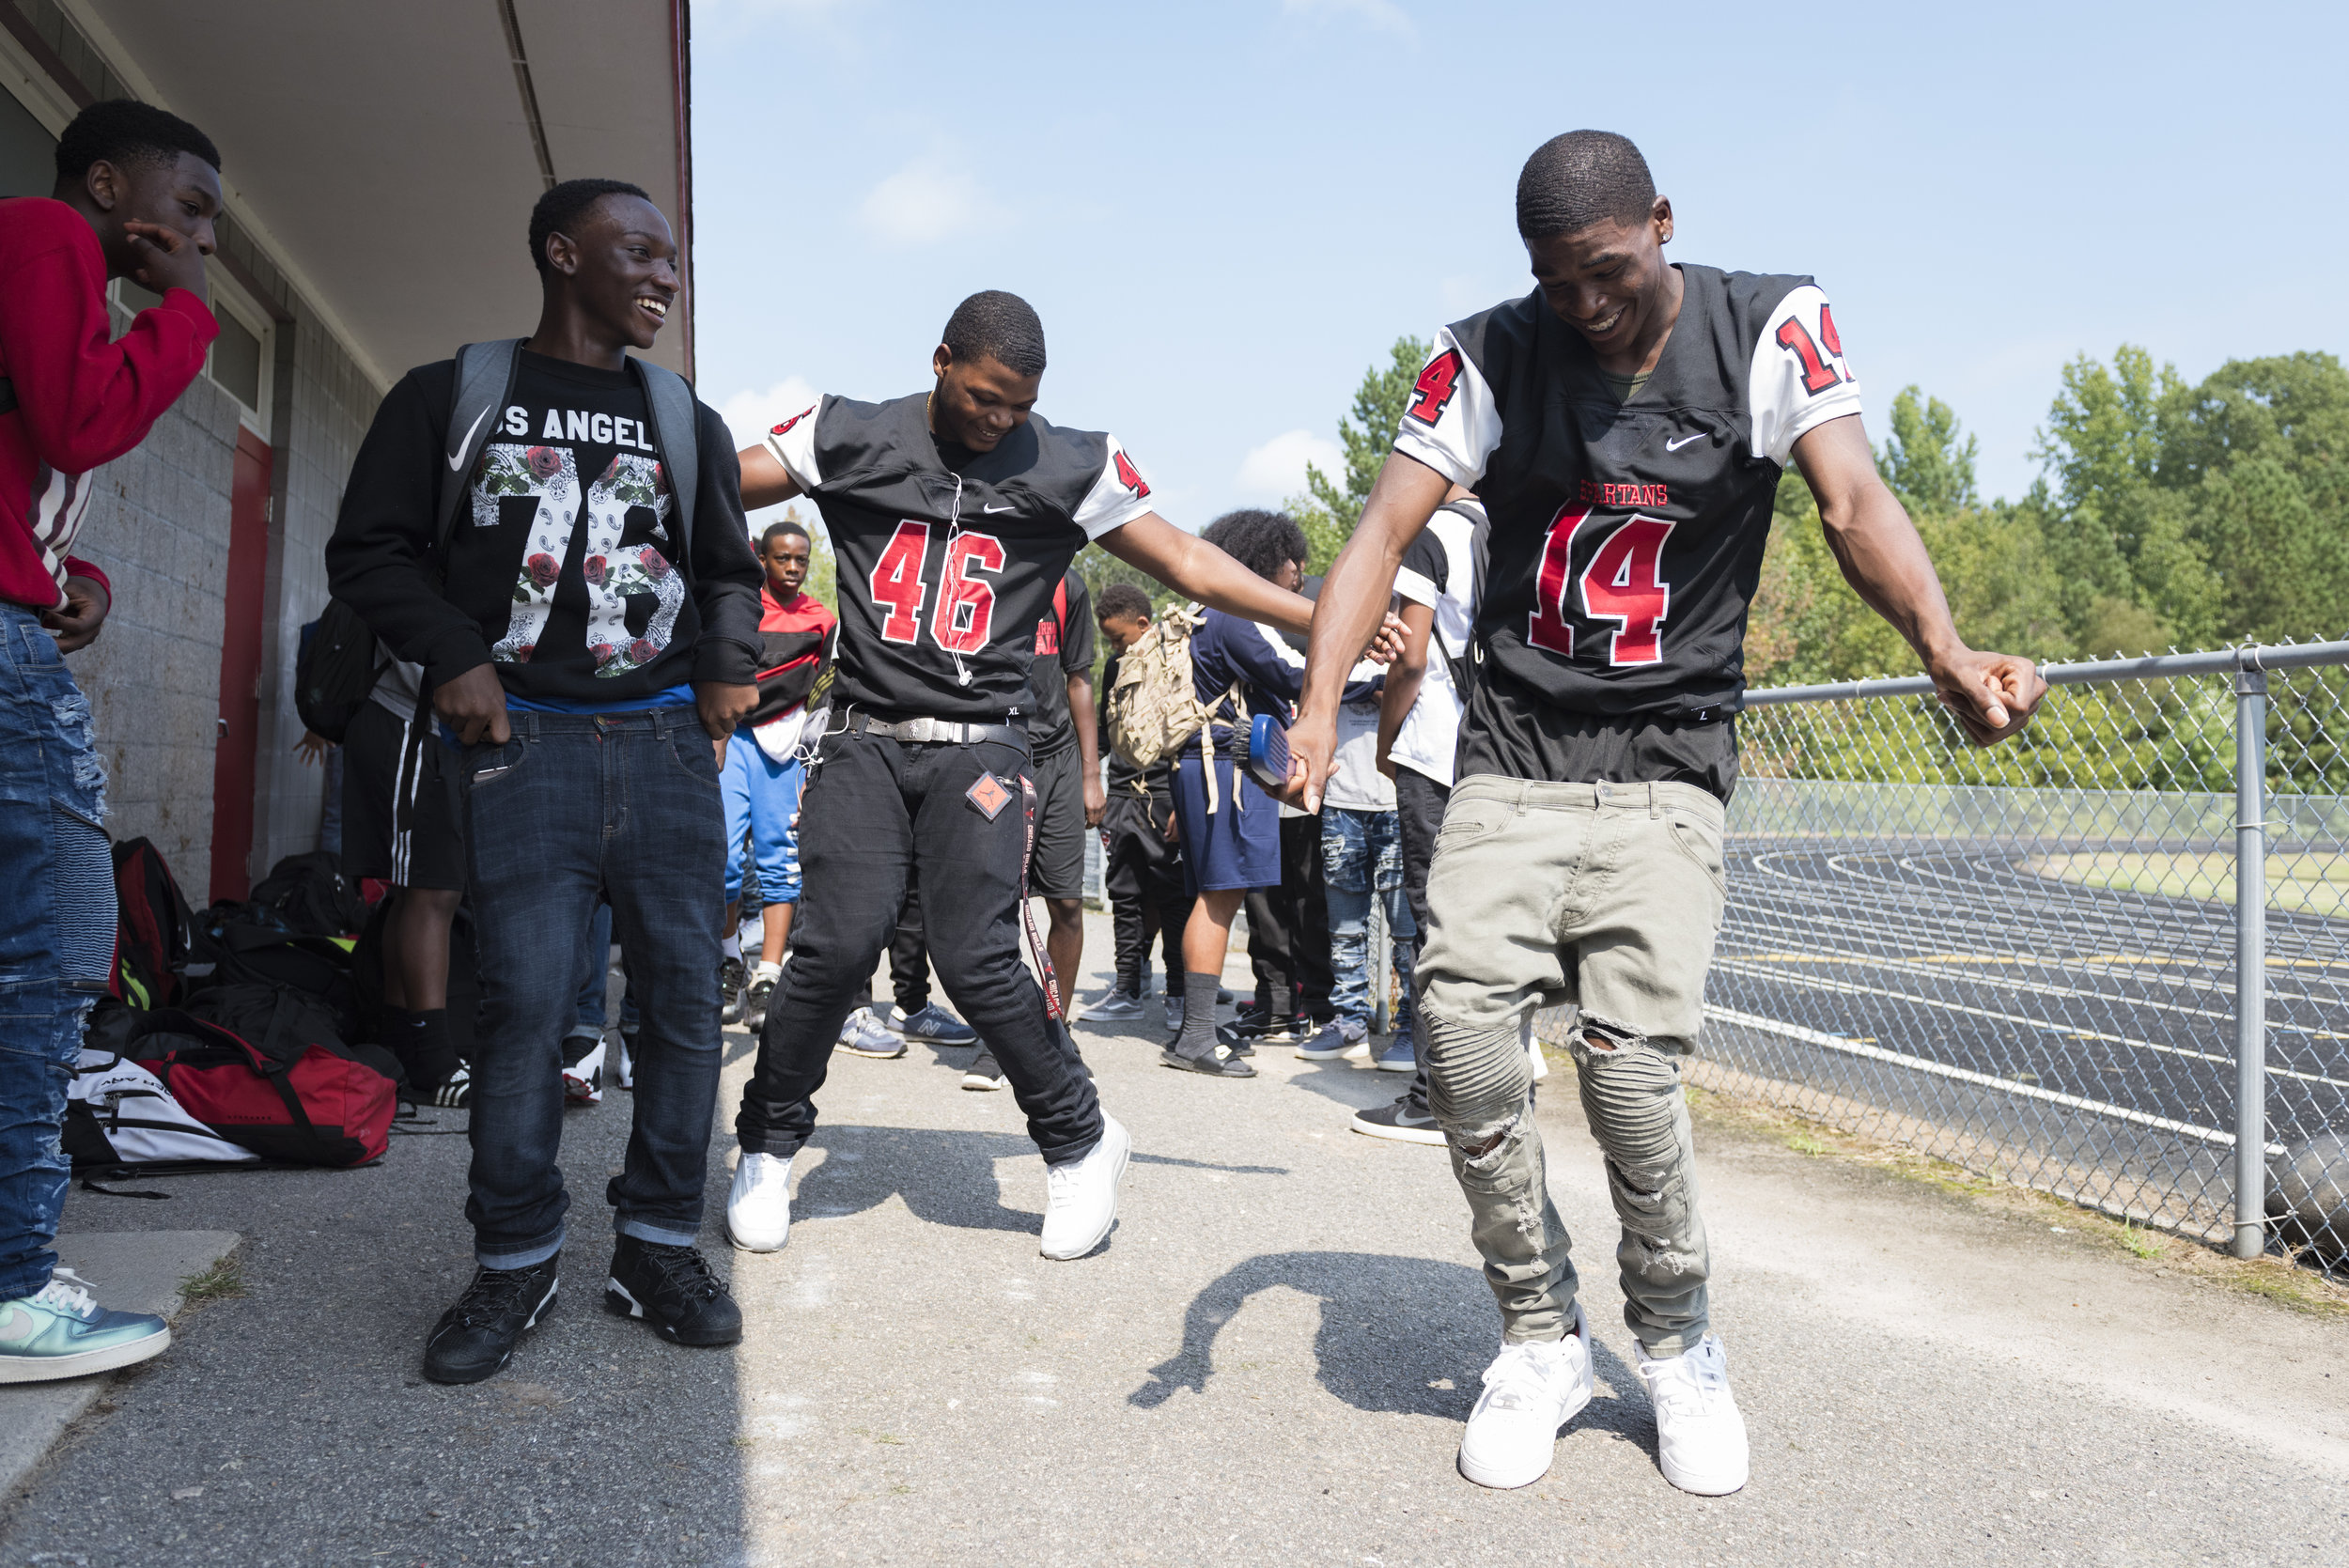  Southern Durham players Lavar Houze (46) and Cinsere Clark (14) dance during the team's homecoming pep-rally at school. 